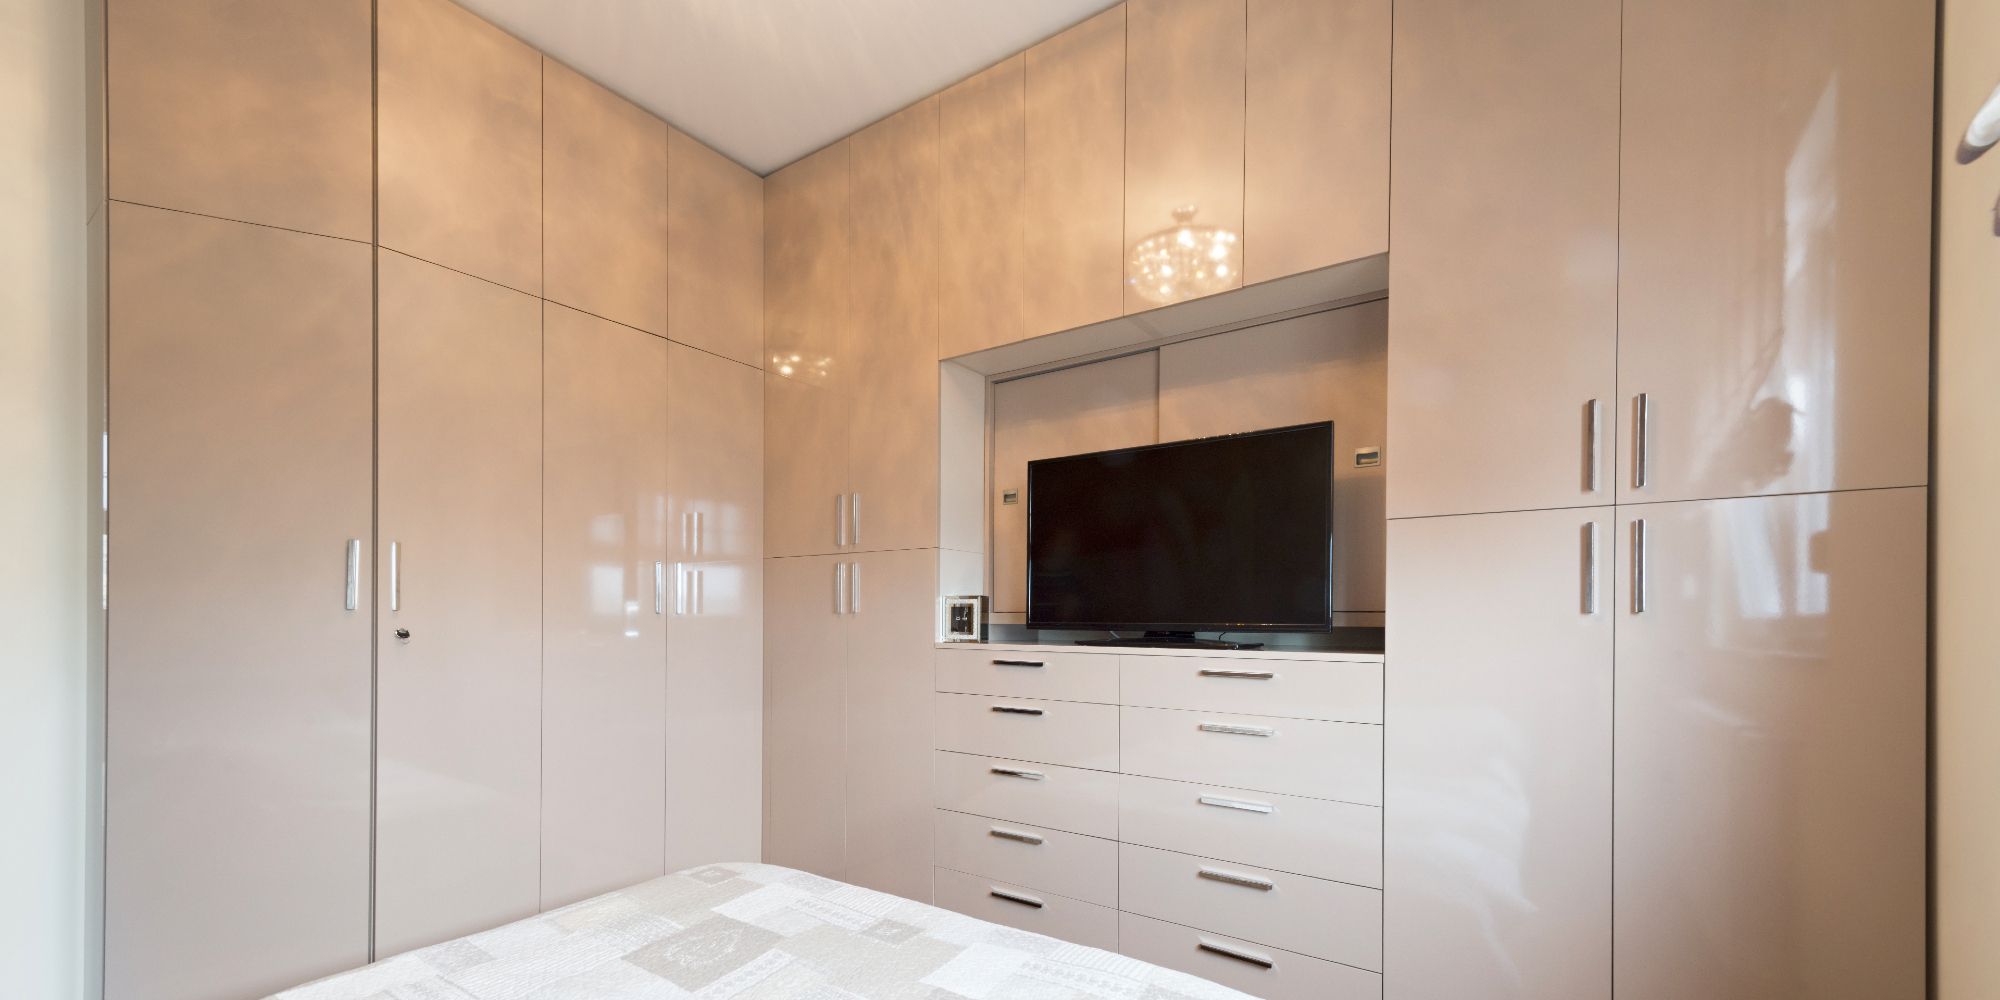 Sliding High Gloss Wardrobes In London | Innovative Designs Inside Glossy Wardrobes (View 15 of 15)